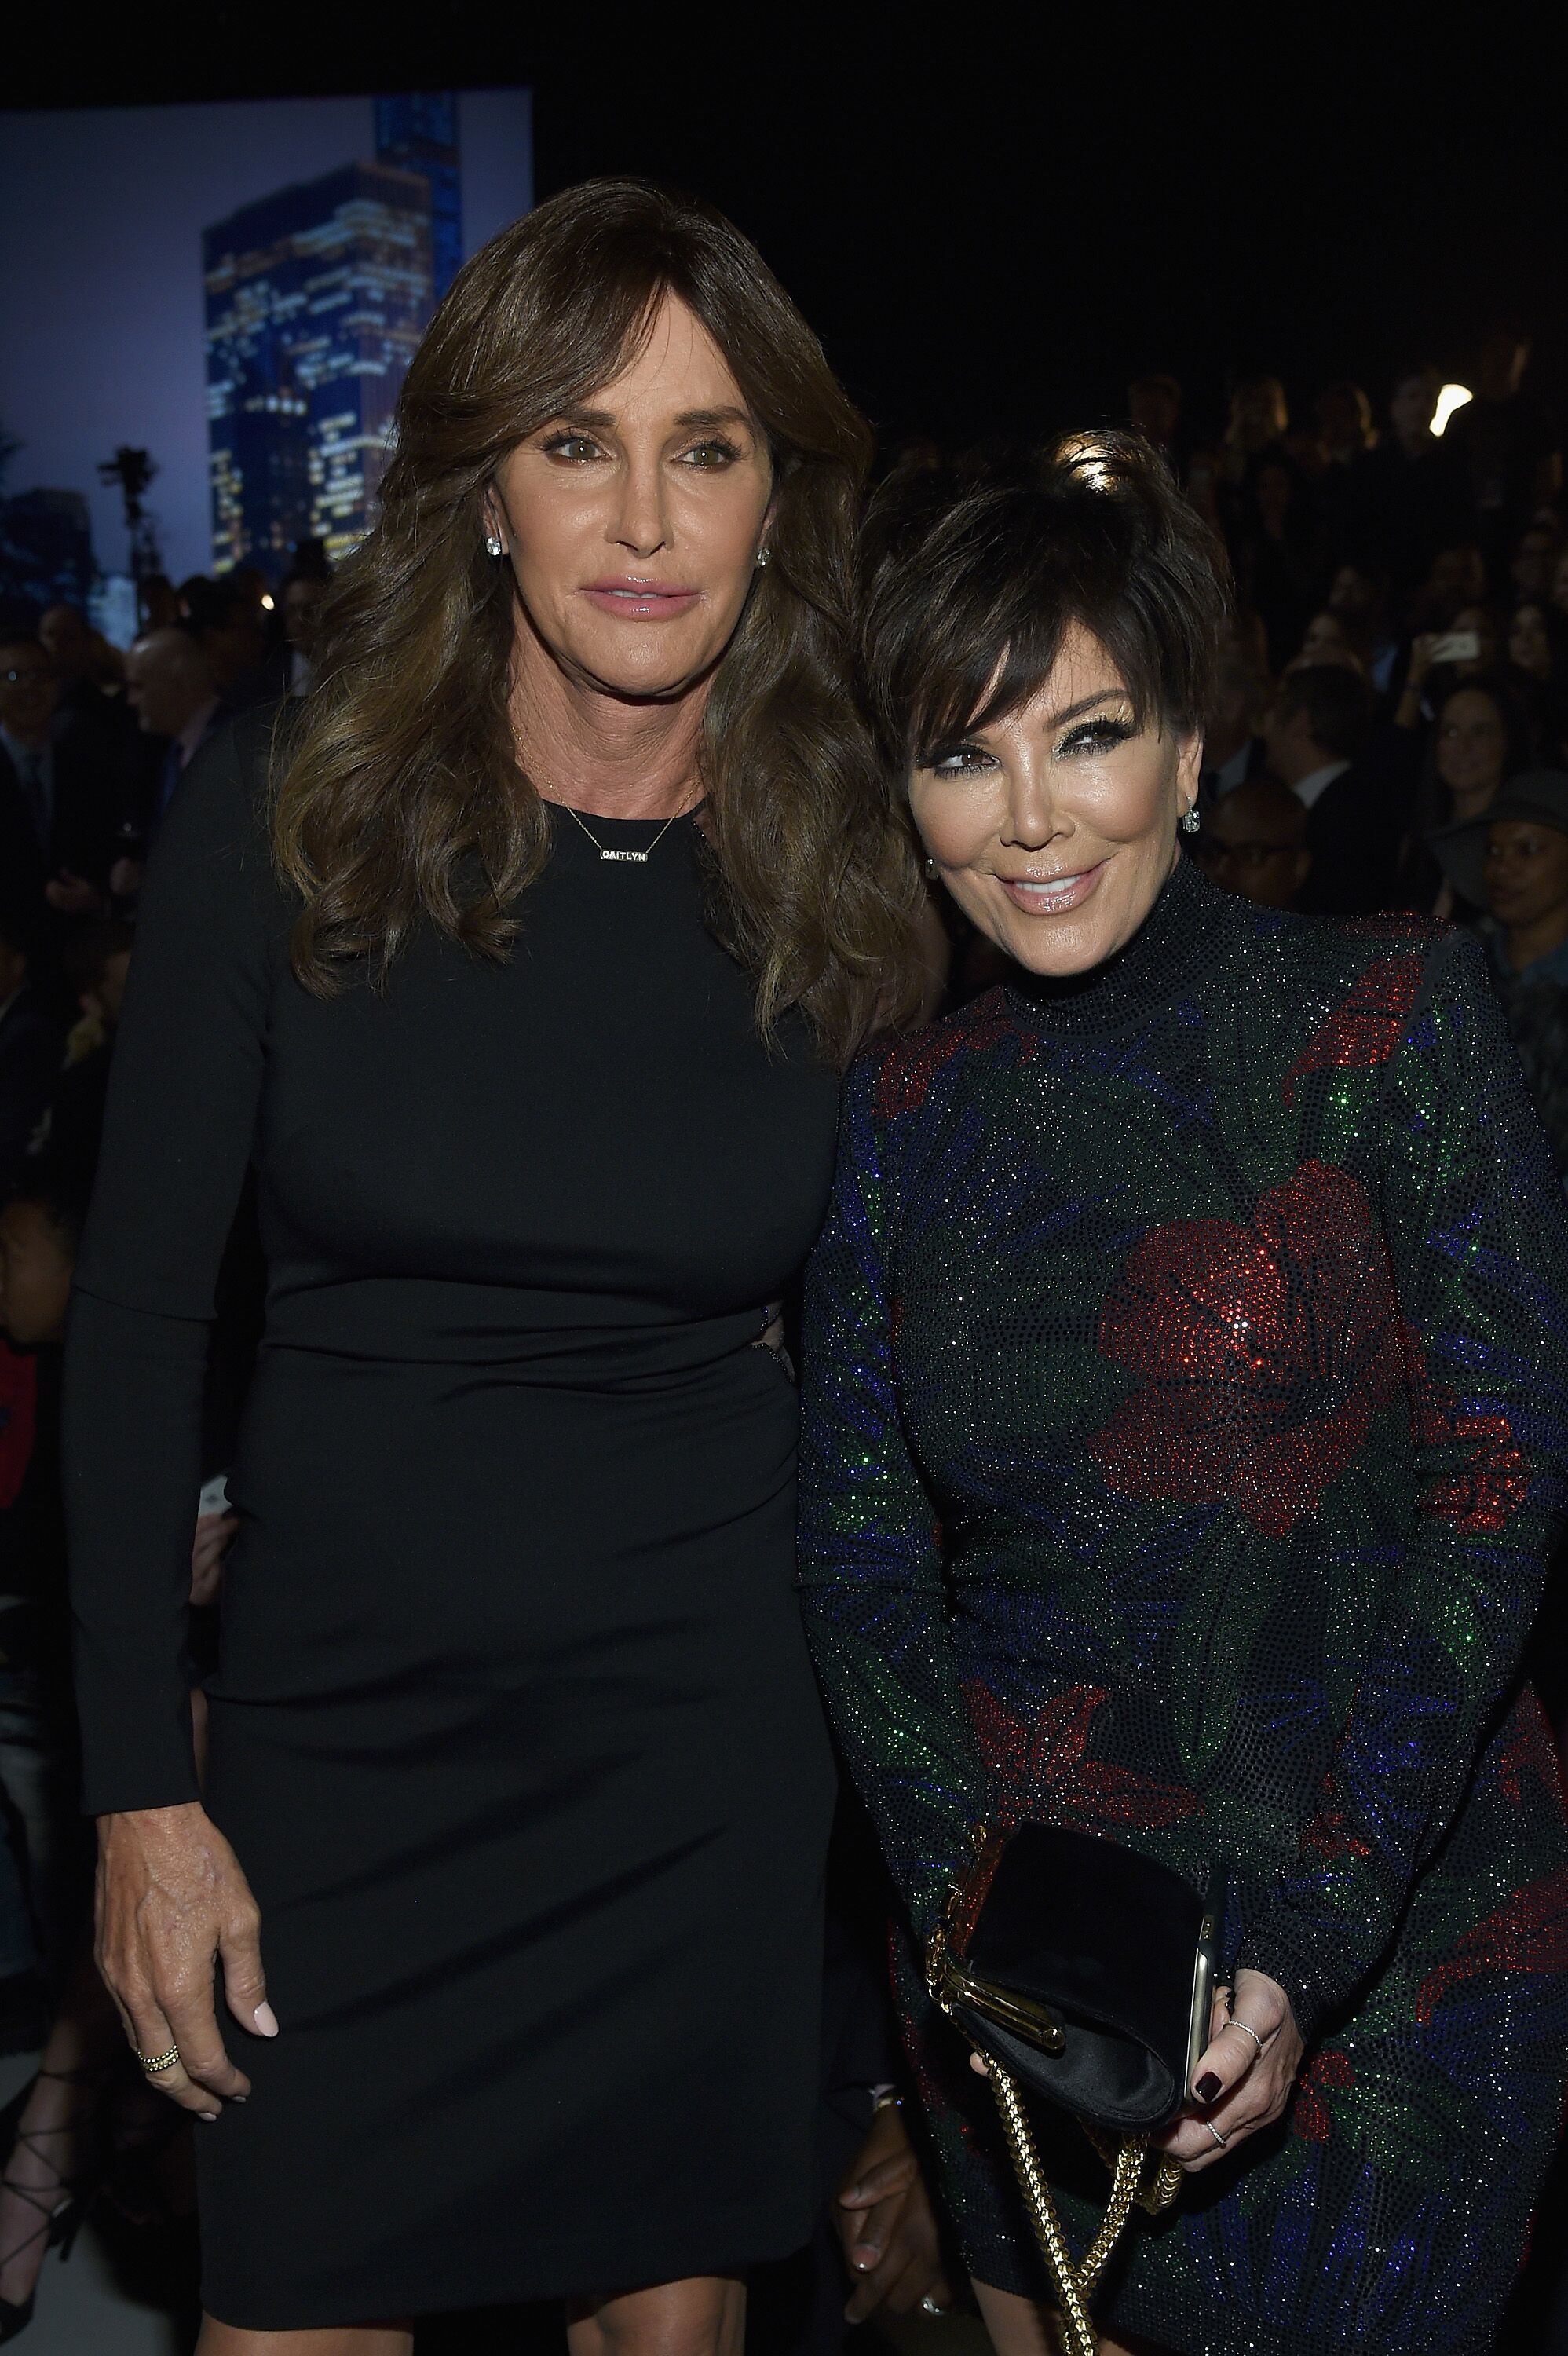 Caitlyn Jenner and Kris Jenner attend the 2015 Victoria's Secret Fashion in New York | Source: Getty Images